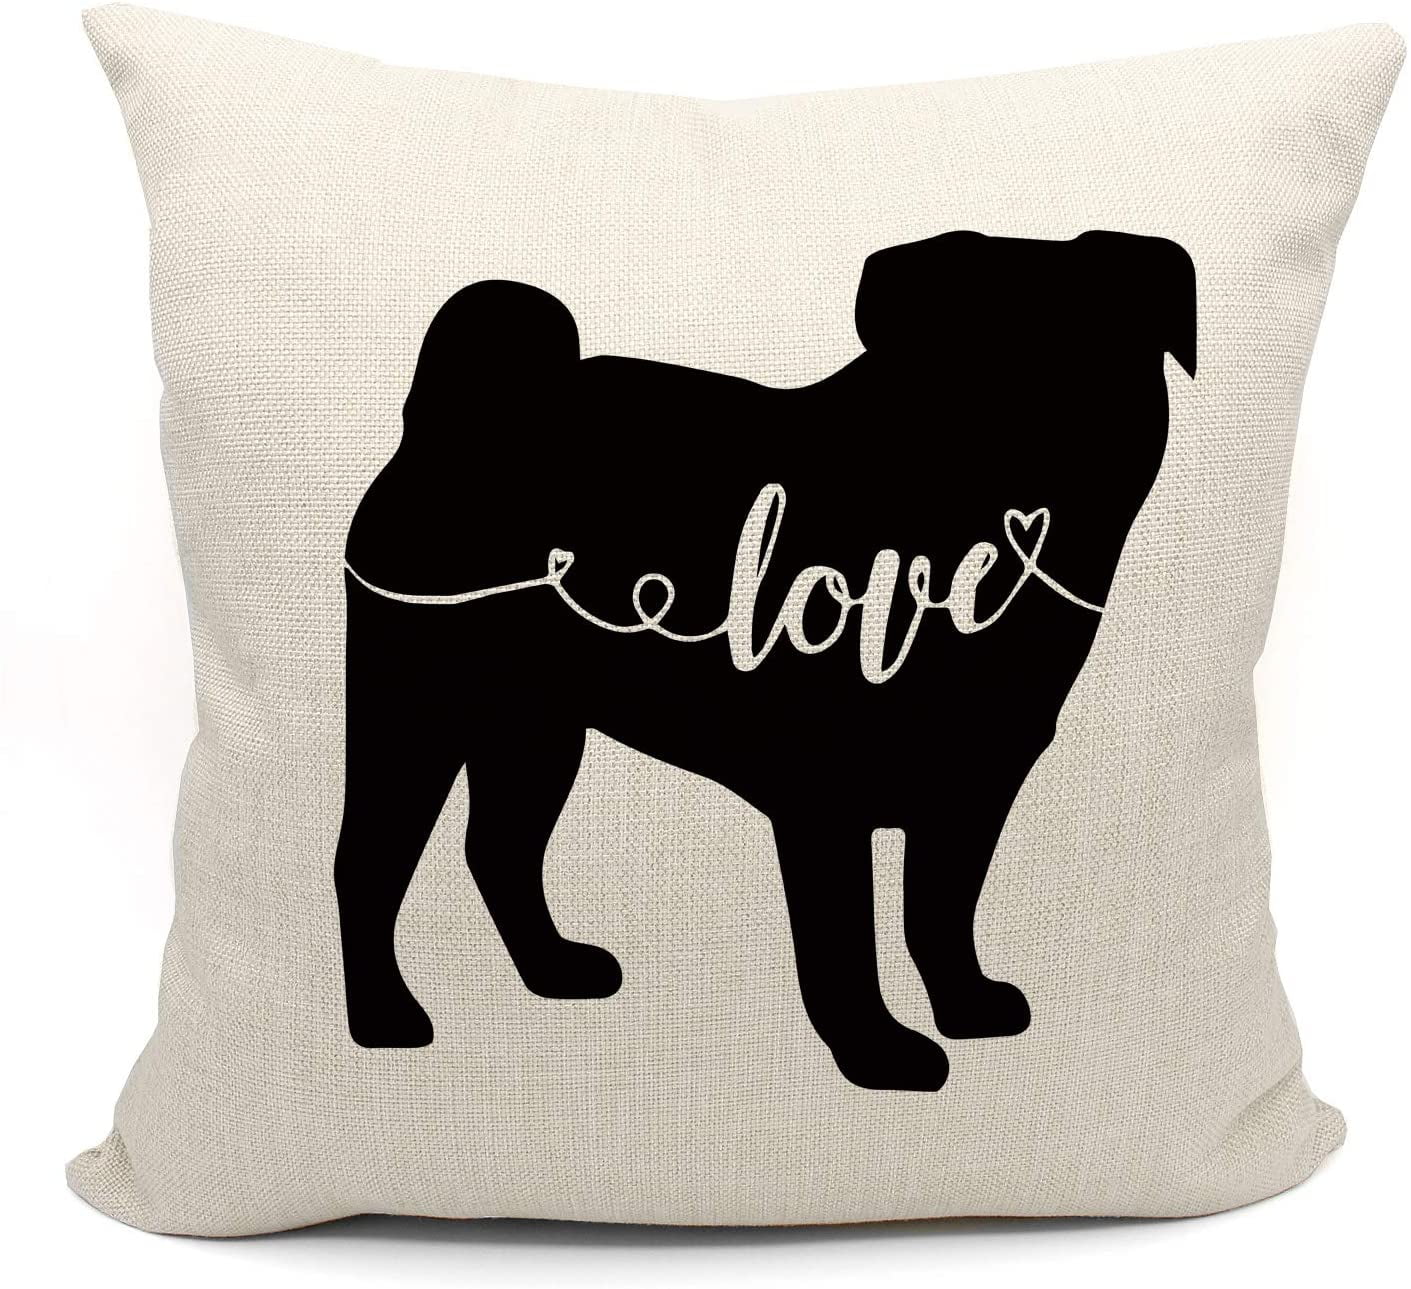 Pug Black Shaped Pillow Bedding Dogs Dog Gift Pillows 18” 